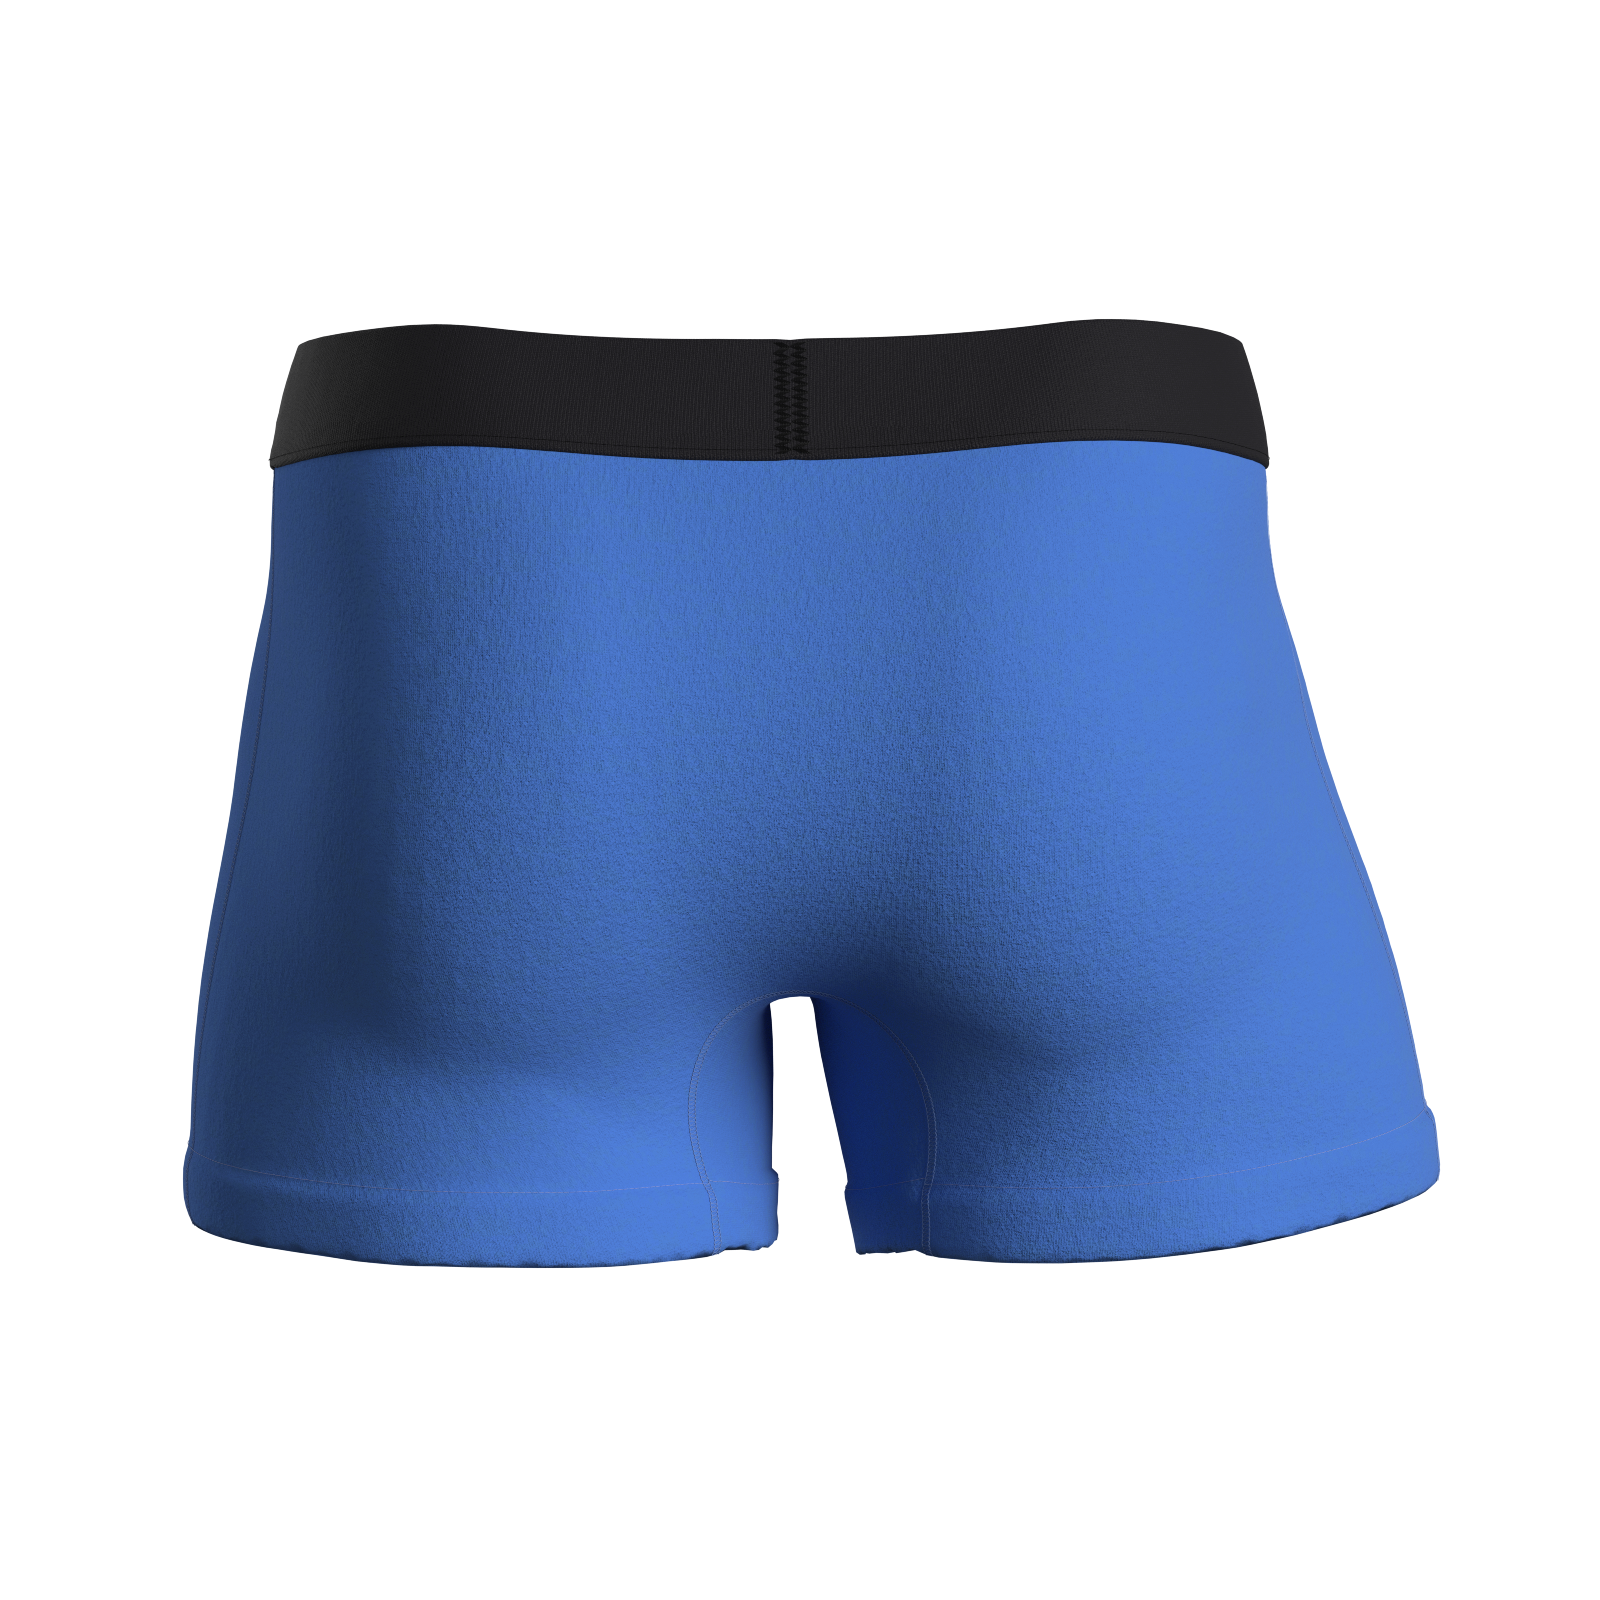 Underwear that Stops the Pee Spot  Eclectic Blue – Manley Barrier